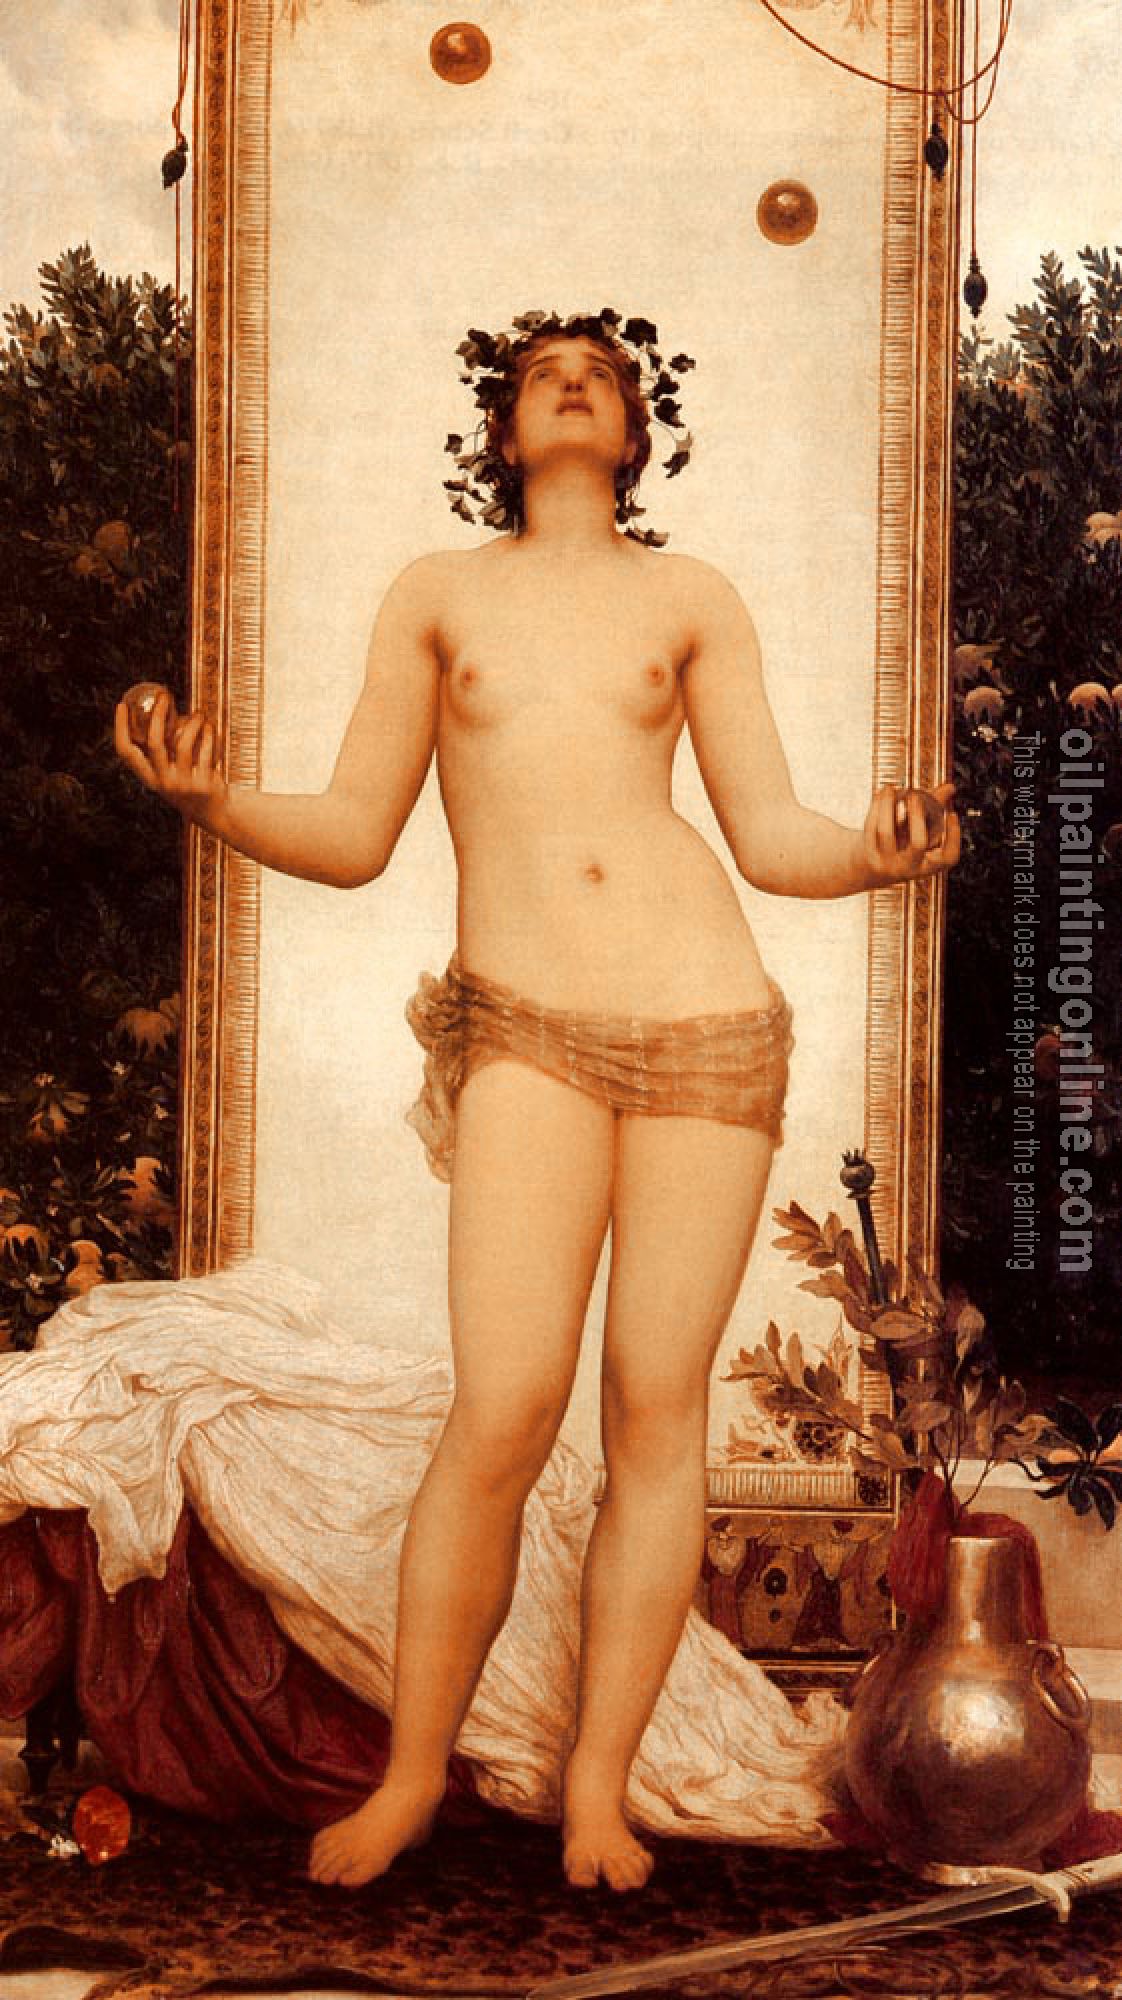 Leighton, Lord Frederick - The Antique Juggling Girl